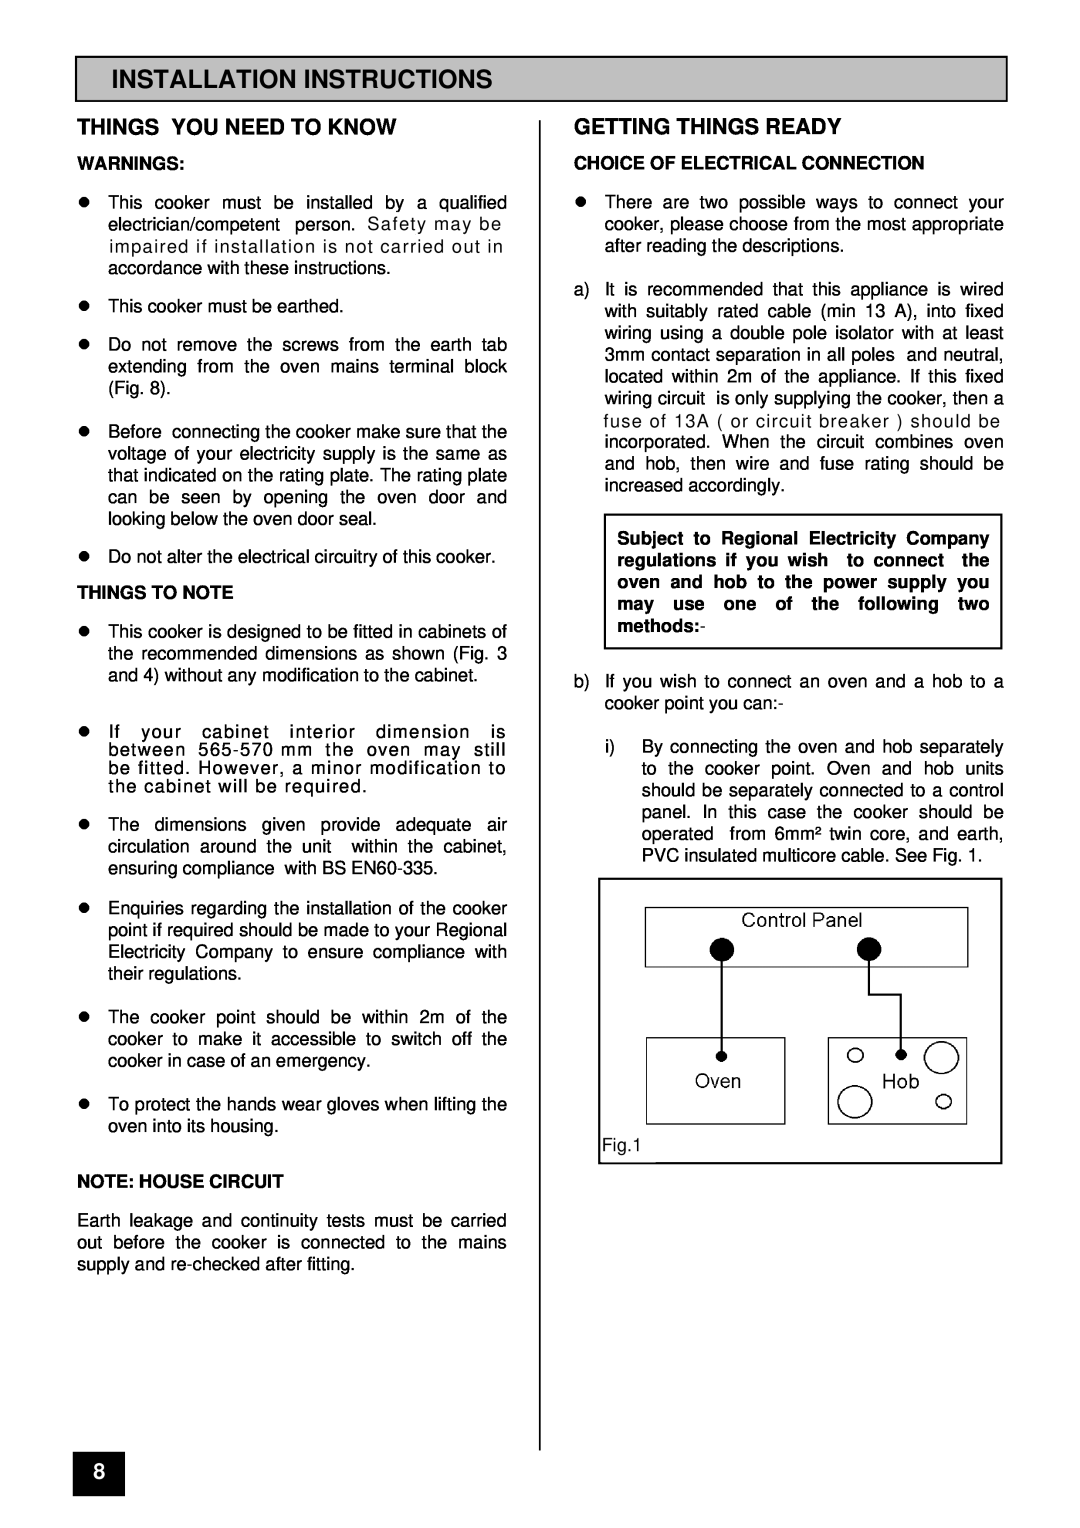 Tricity Bendix BS 615 SO Installation Instructions, Things You Need To Know, Getting Things Ready, Warnings 